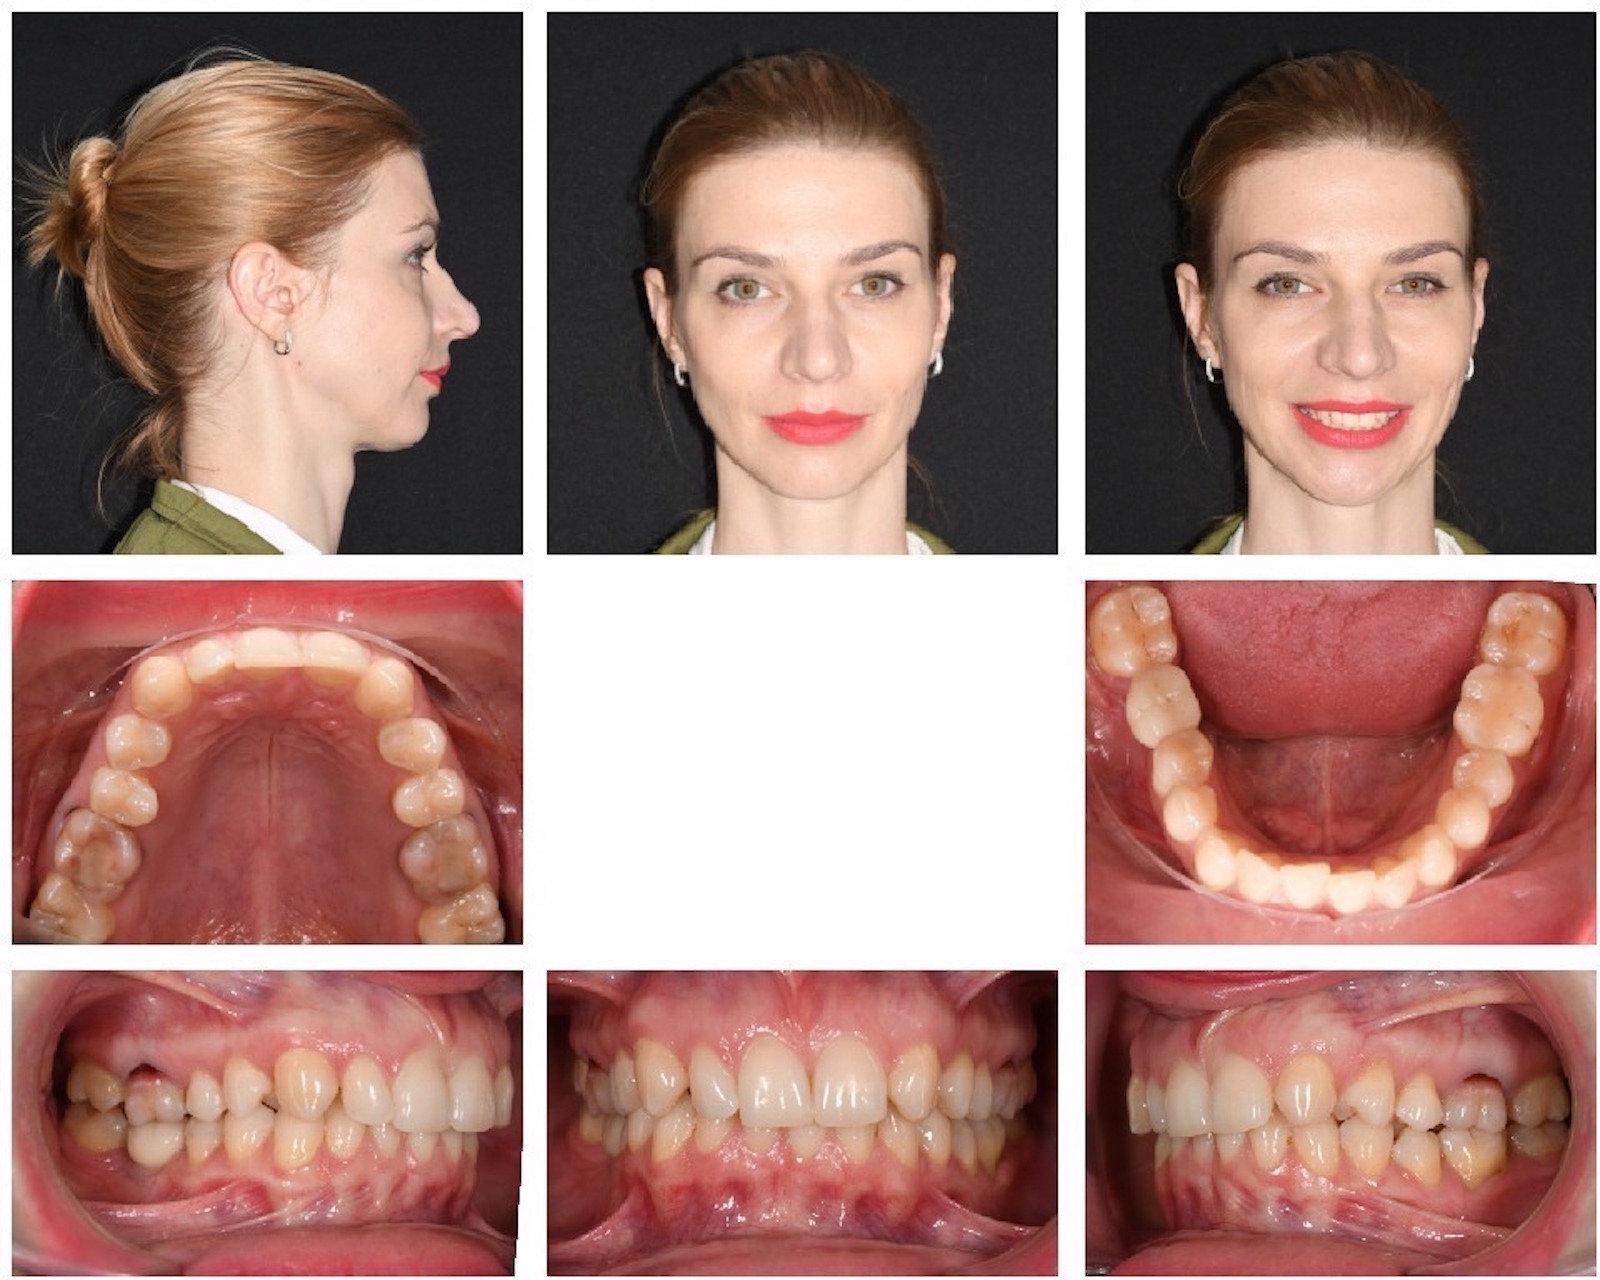 Fig. 1: Pretreatment facial and intra-oral photographs.